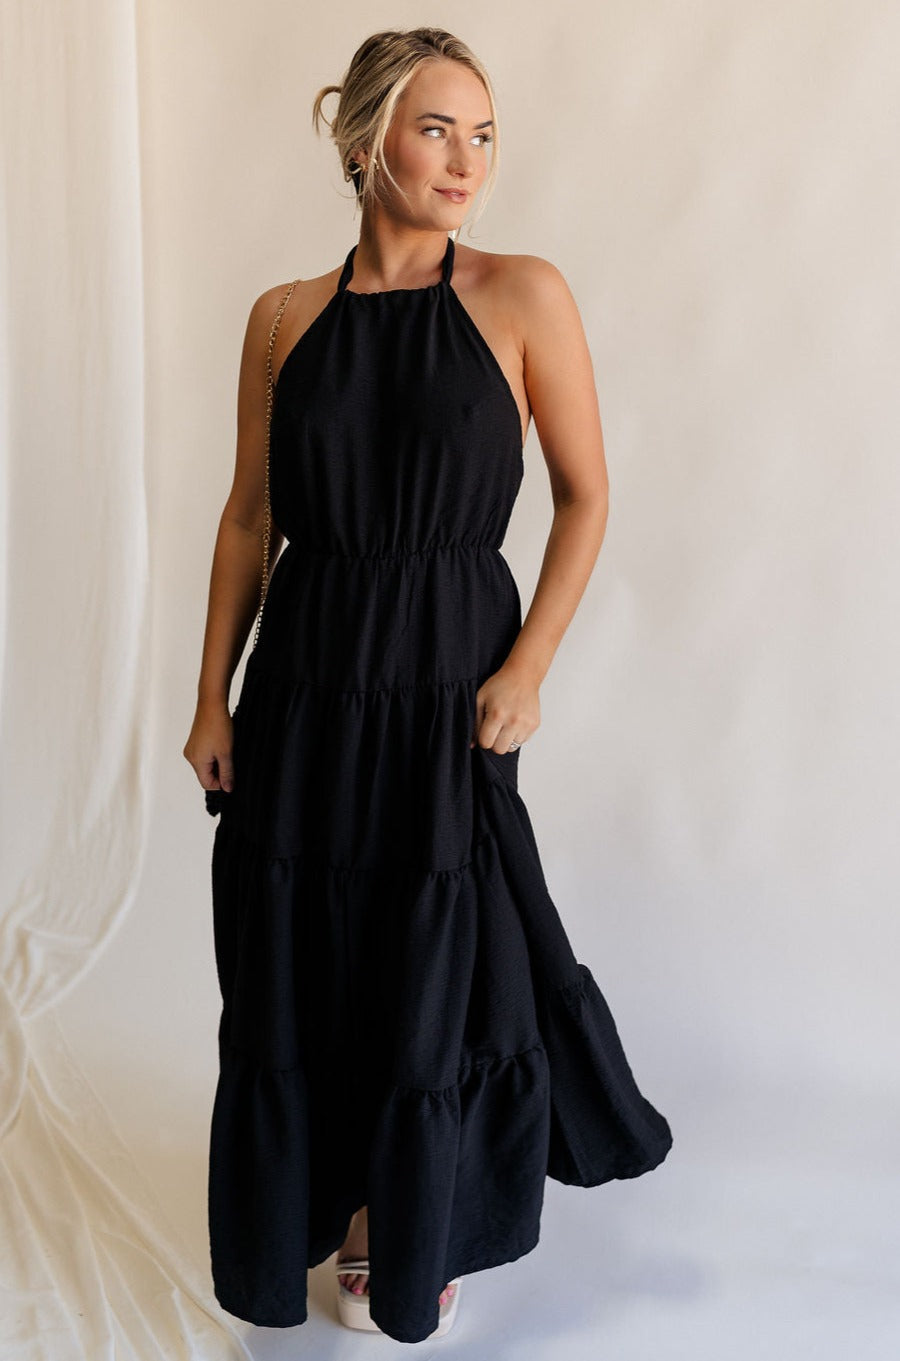 Full body view of female model wearing the Luna Halter Tie Tiered Maxi Dress in black which features  Lightweight Fabric, Tiered Body, Maxi Length, Thigh Length Lining, Halter Neckline with Tie  and Open Back